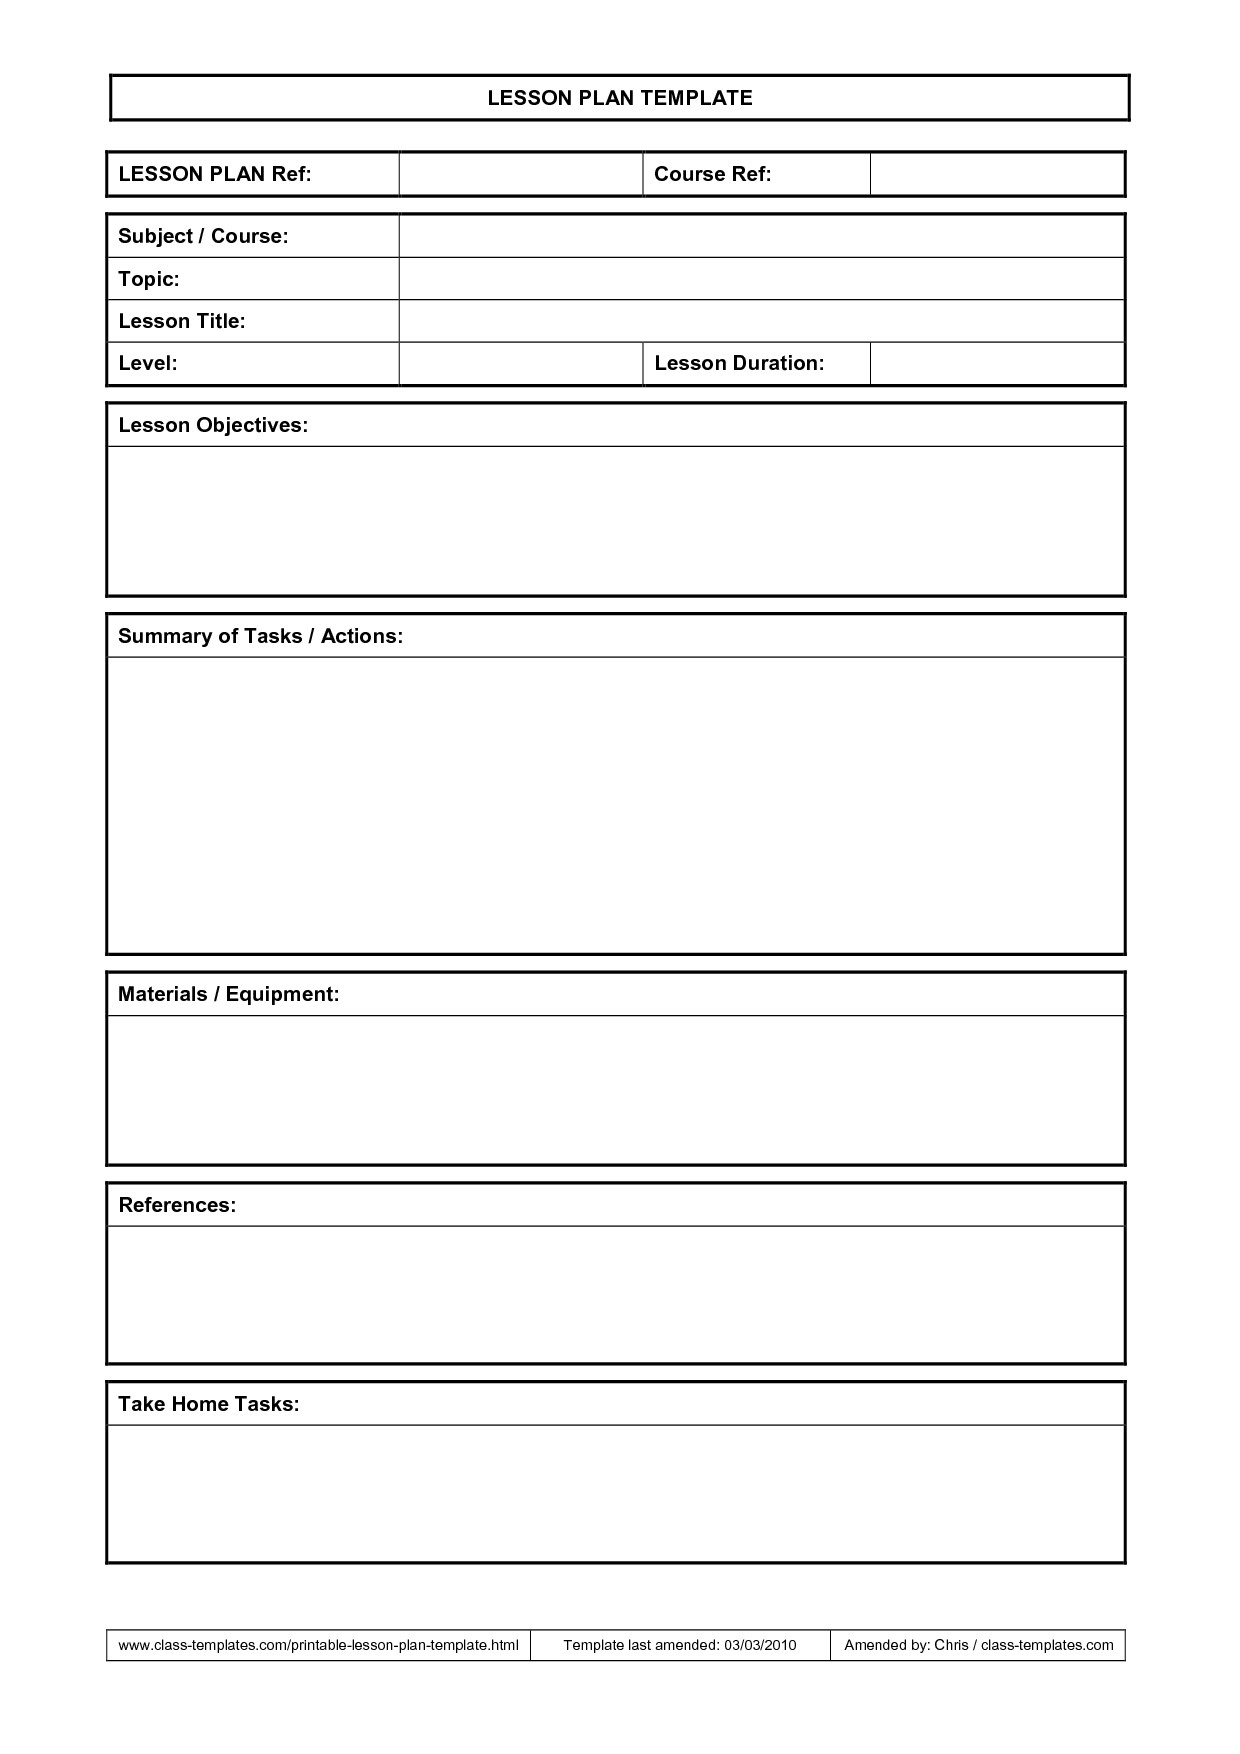 Lesson Plan Images Lesson Plan Template Free